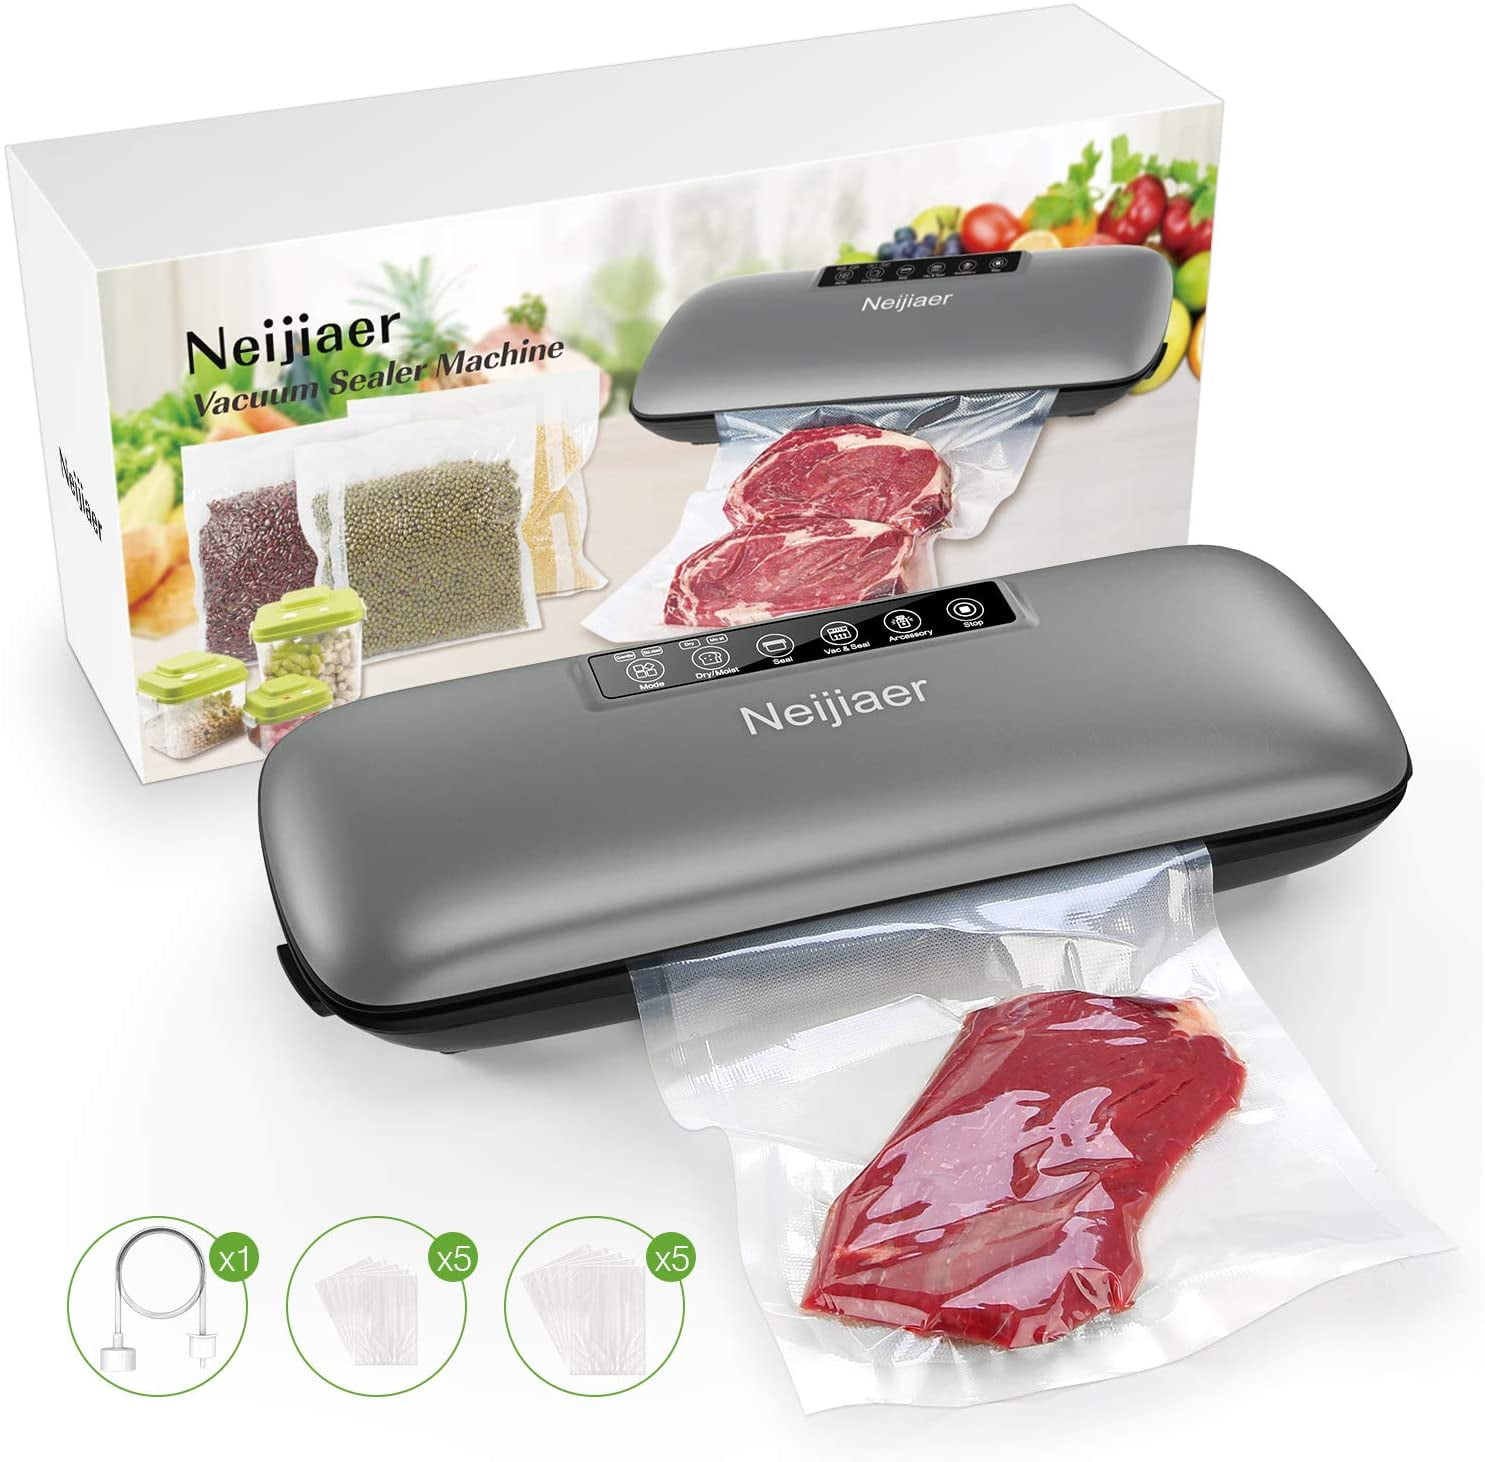 FoodSaver Select Vacuum Sealer with Dry/Moist Modes, Roll Storage and  Cutter Bar, and Bags and Roll Starter Kit - Silver